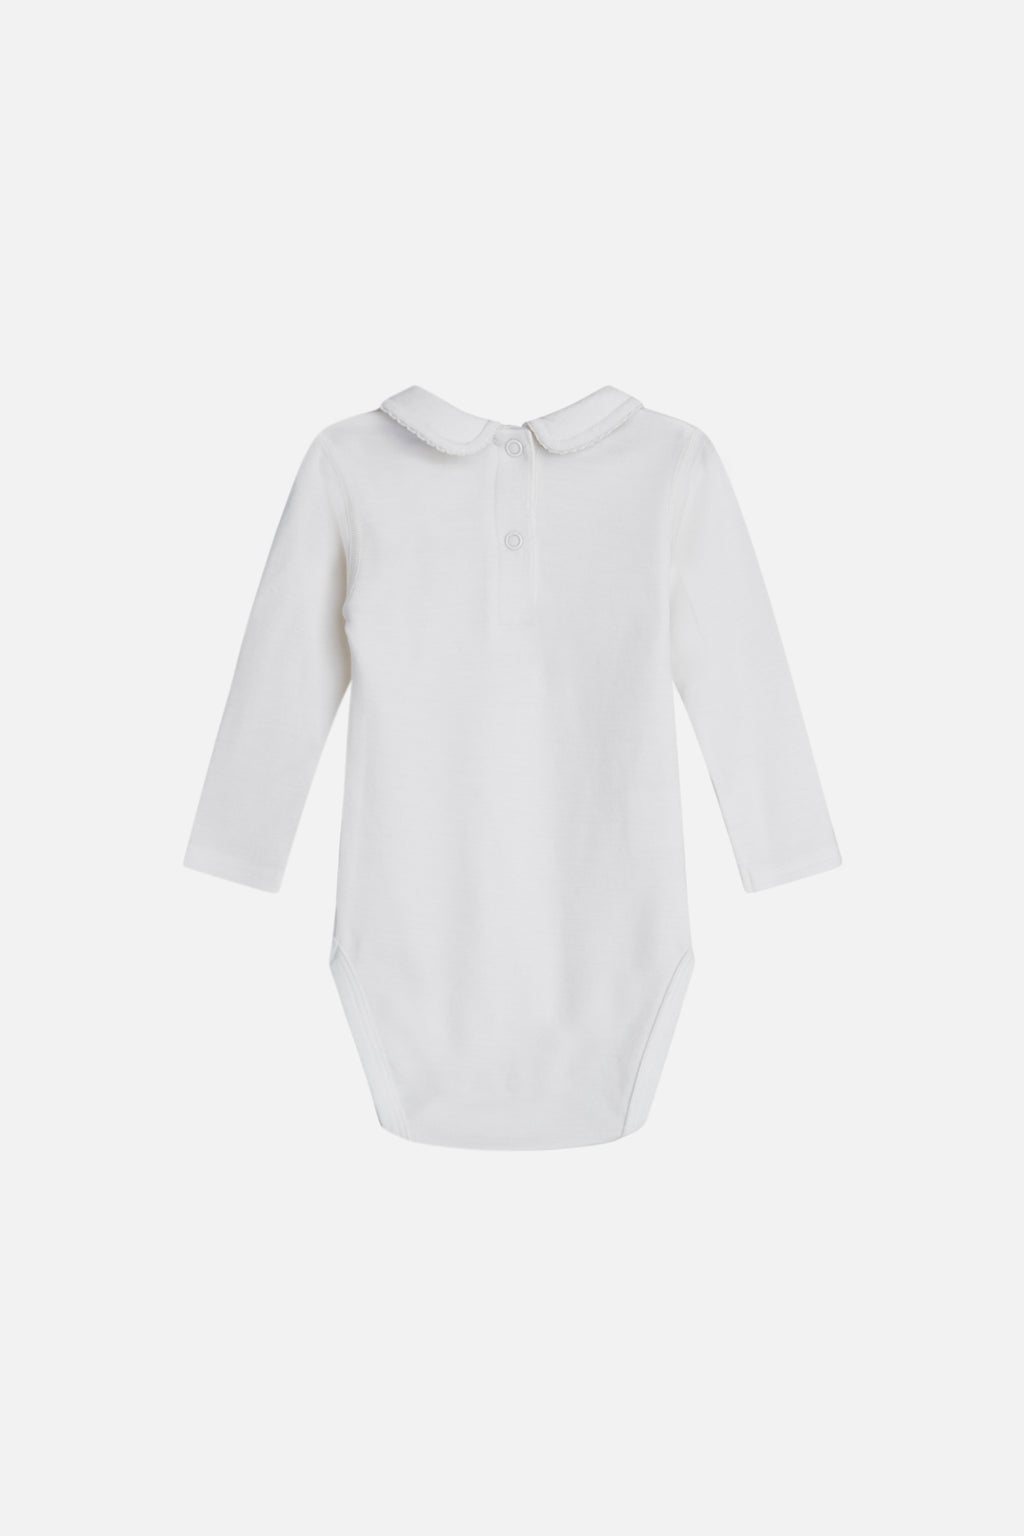 Hust and Claire Beate Wool Body Off White